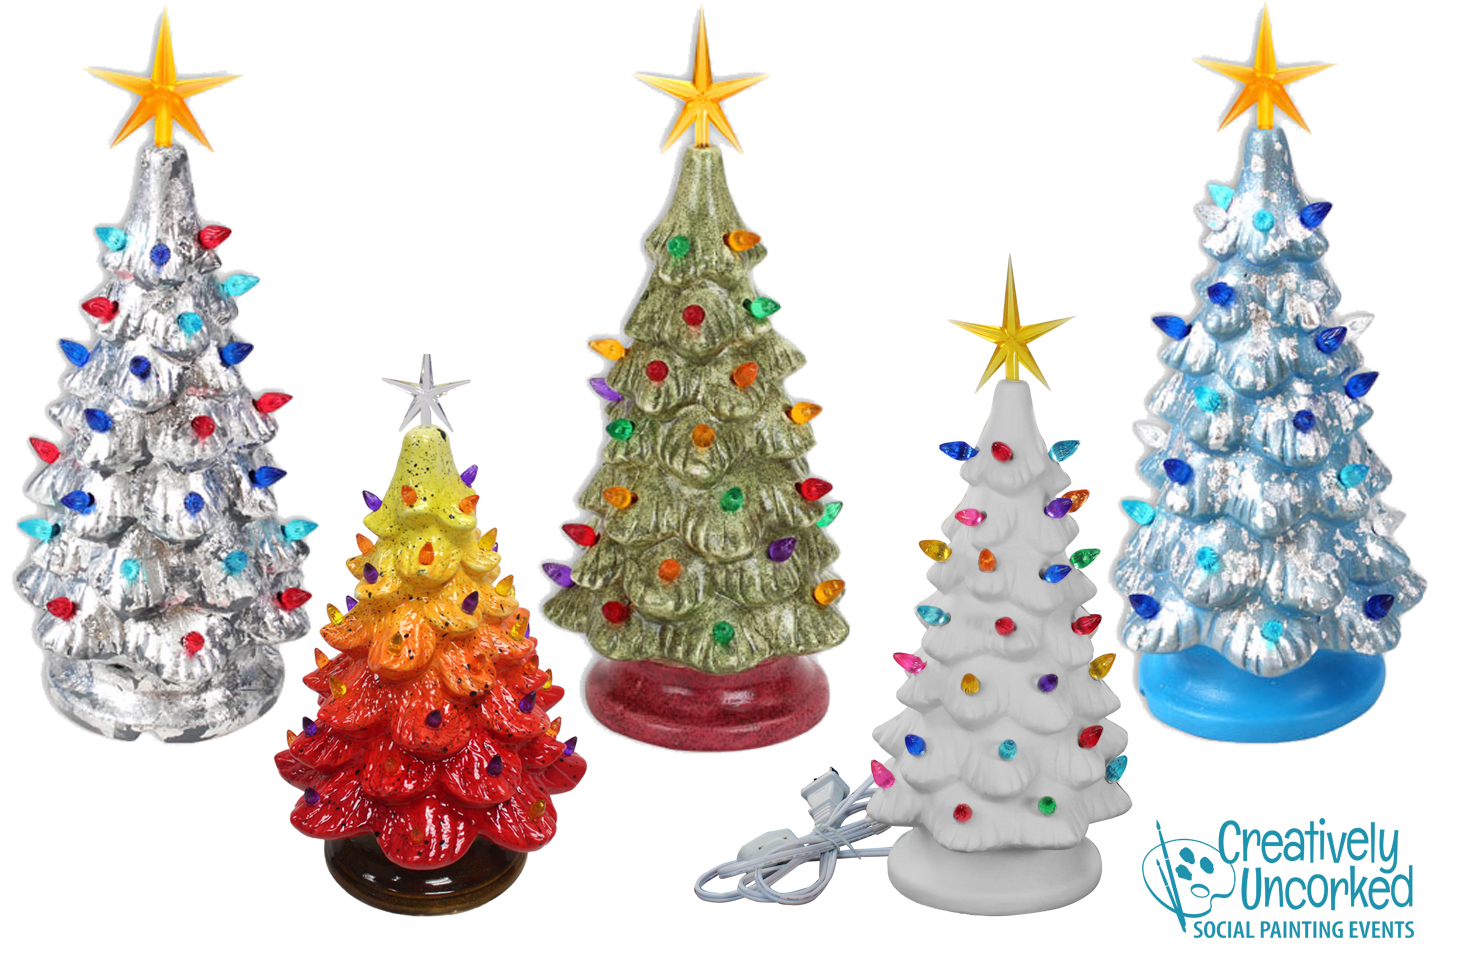 Lighted Ceramic Christmas Tree at Creatively Uncorked https://creativelyuncorked.com